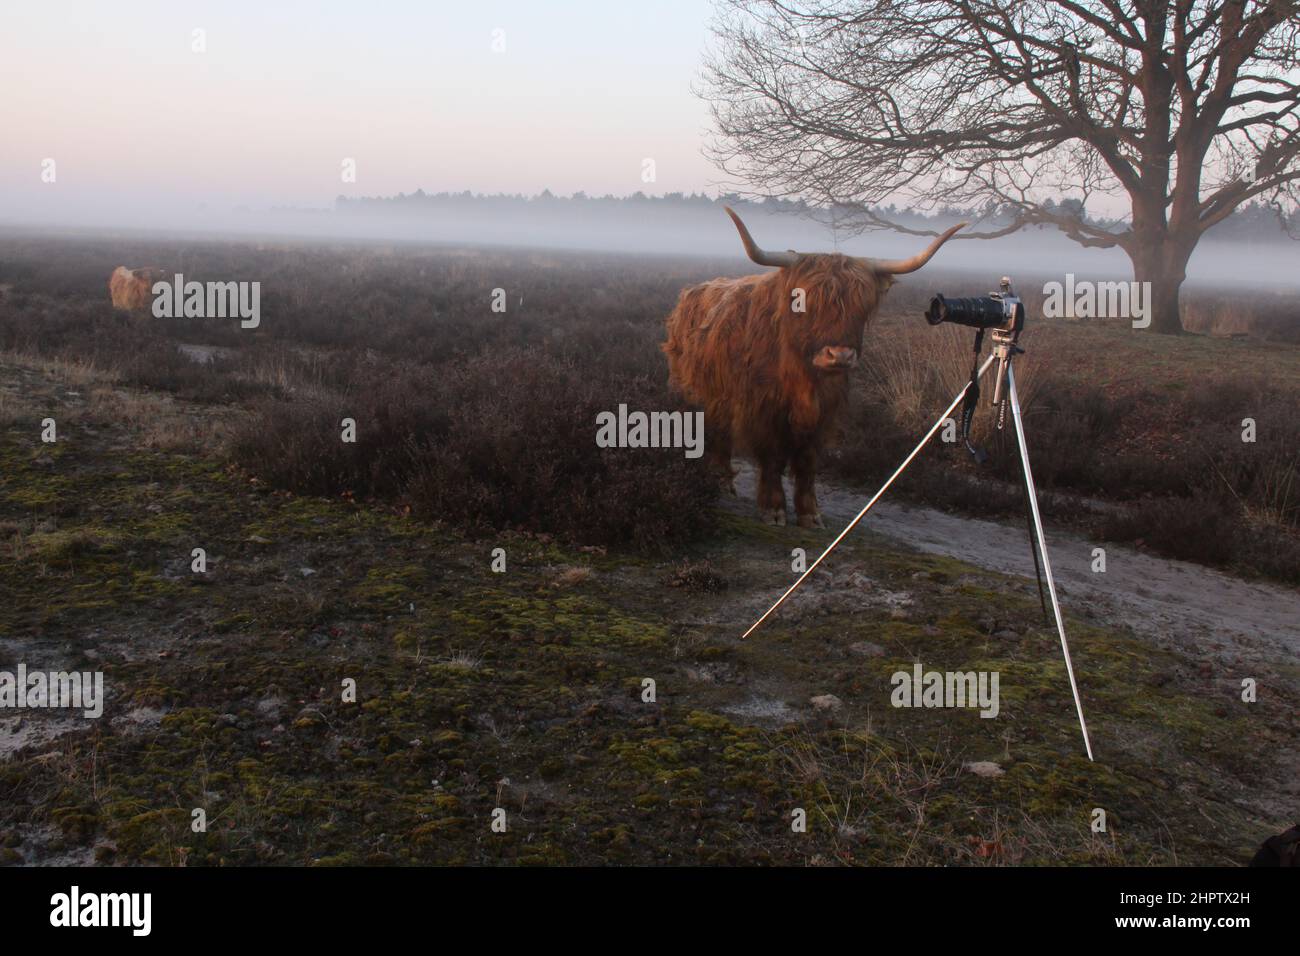 A Scottish highlander looks closely at the camera on a tripod, in a foggy moorland landscape. Stock Photo